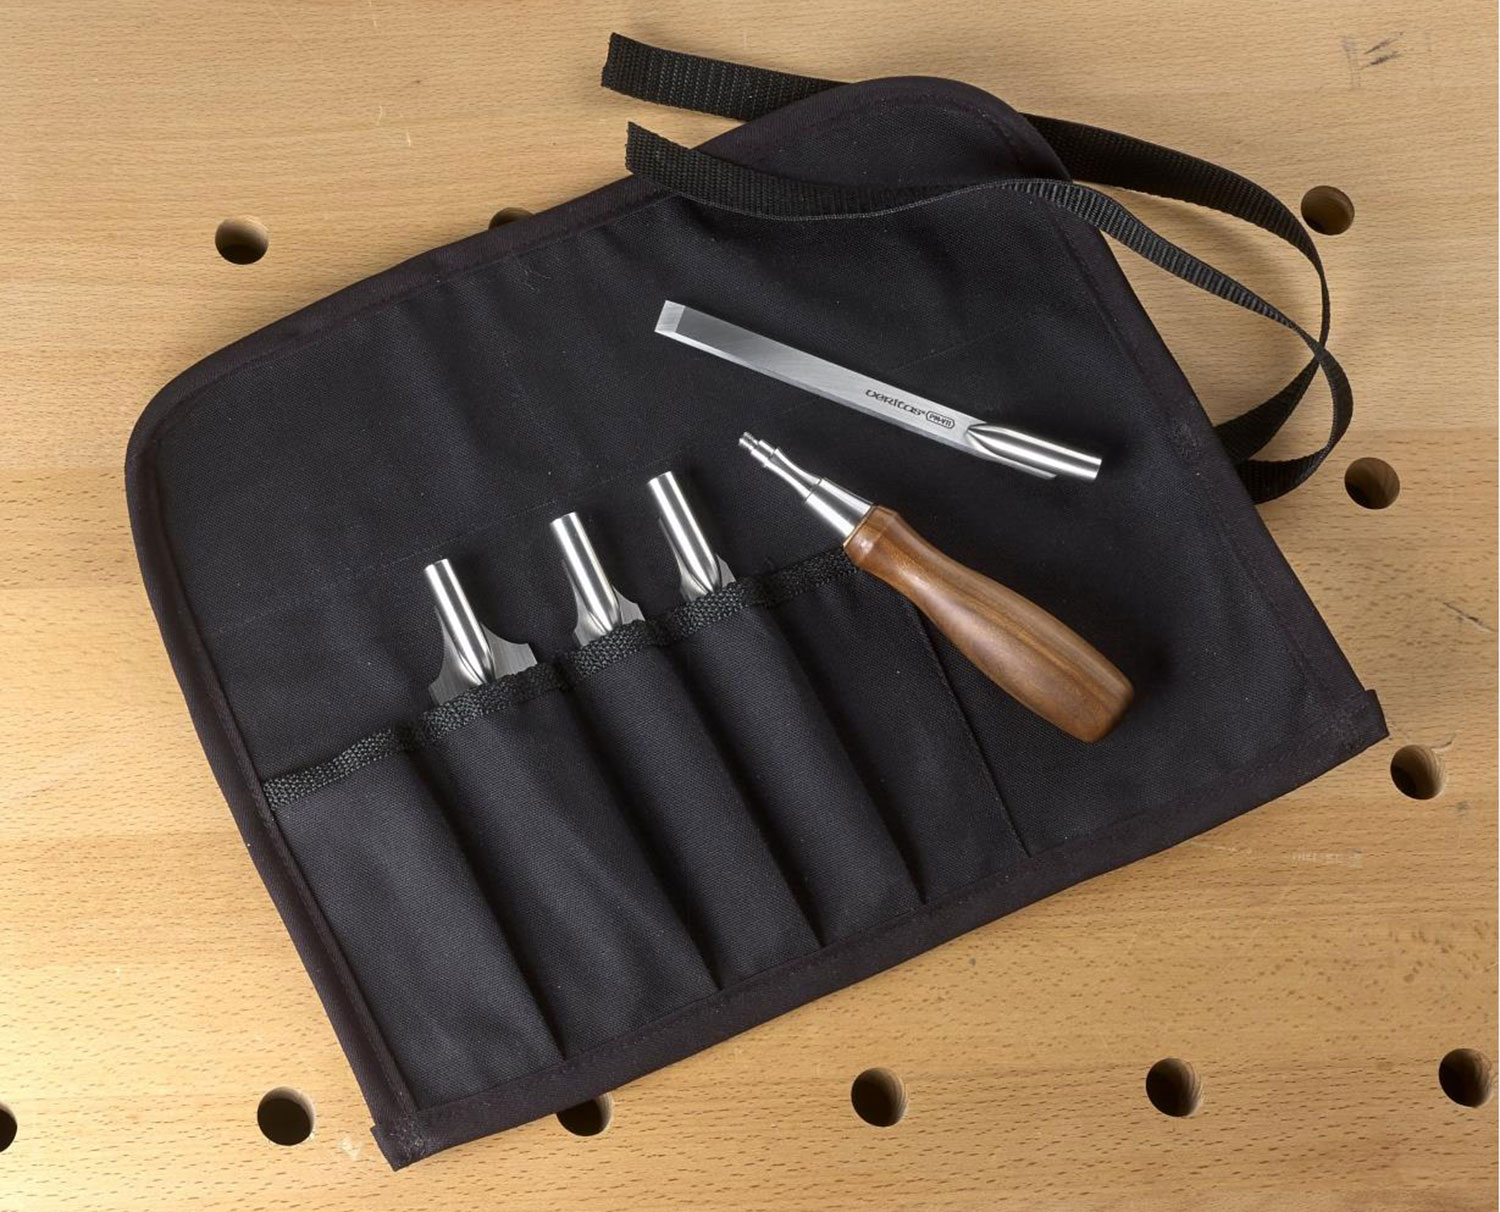 Chisels stored in a Veritas flushing chisel roll.